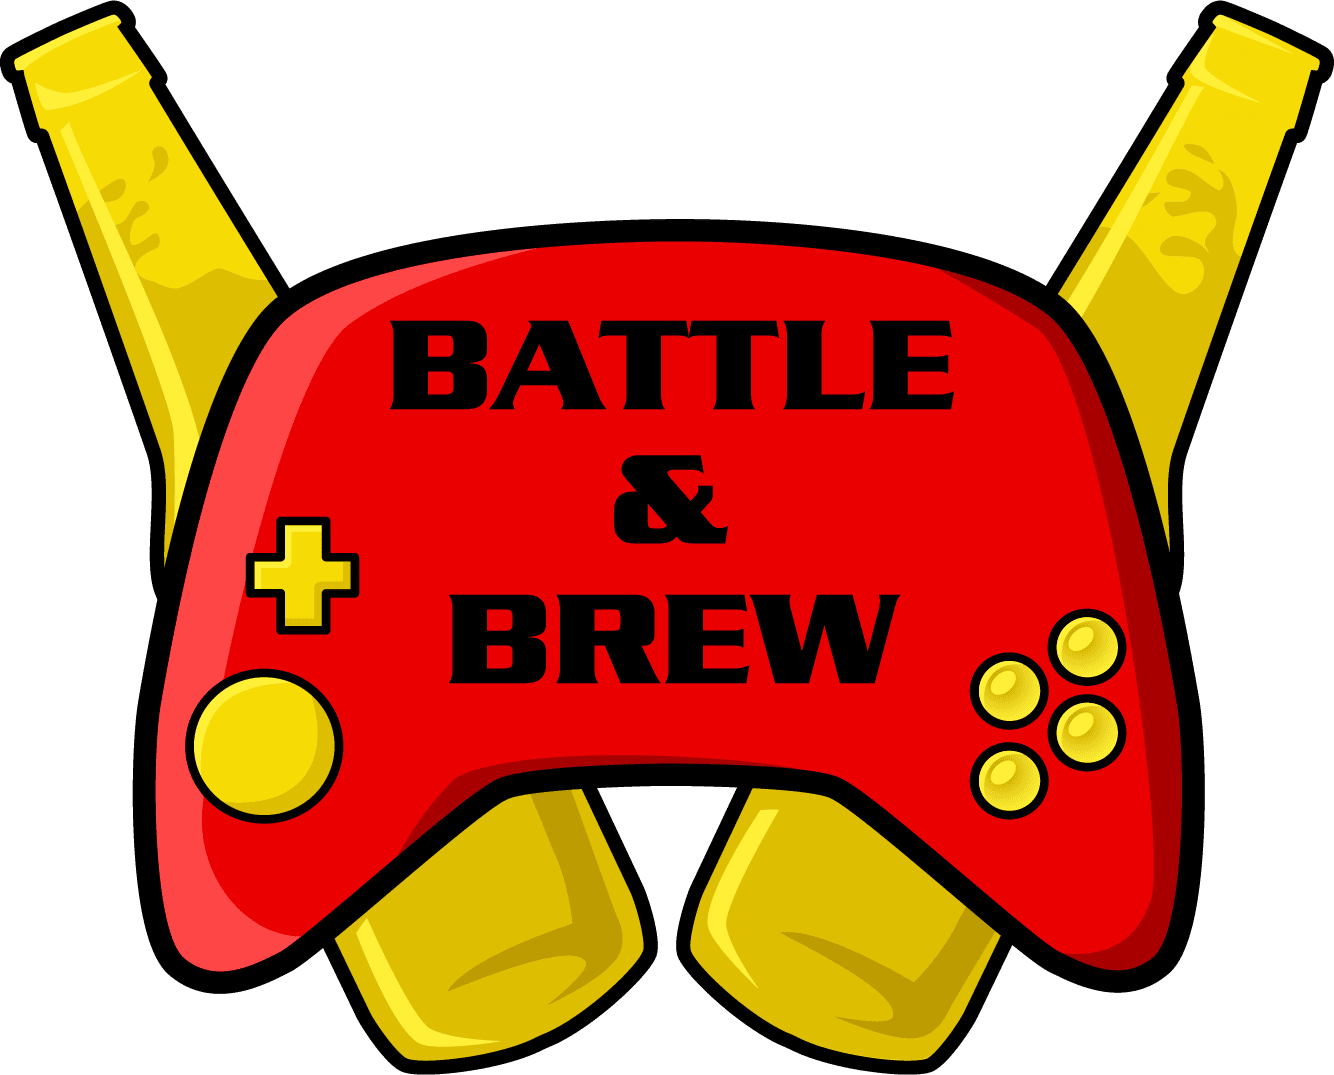 battle and brew logo